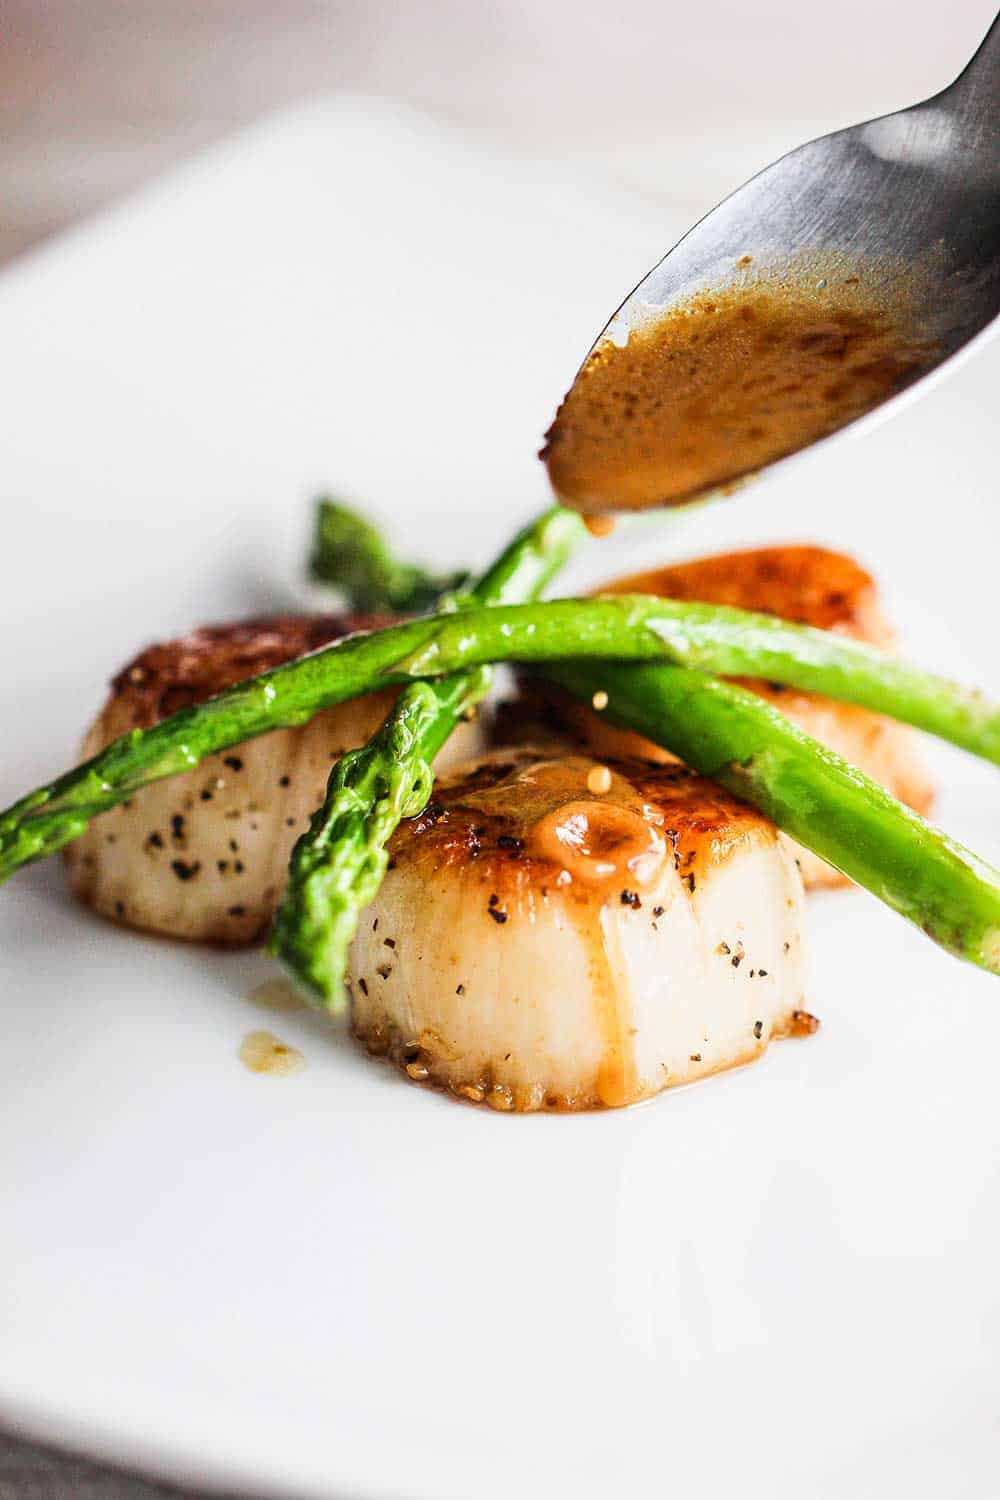 A spoon pouring a brown sauce onto several seared scallops topped with sautéed asparagus.